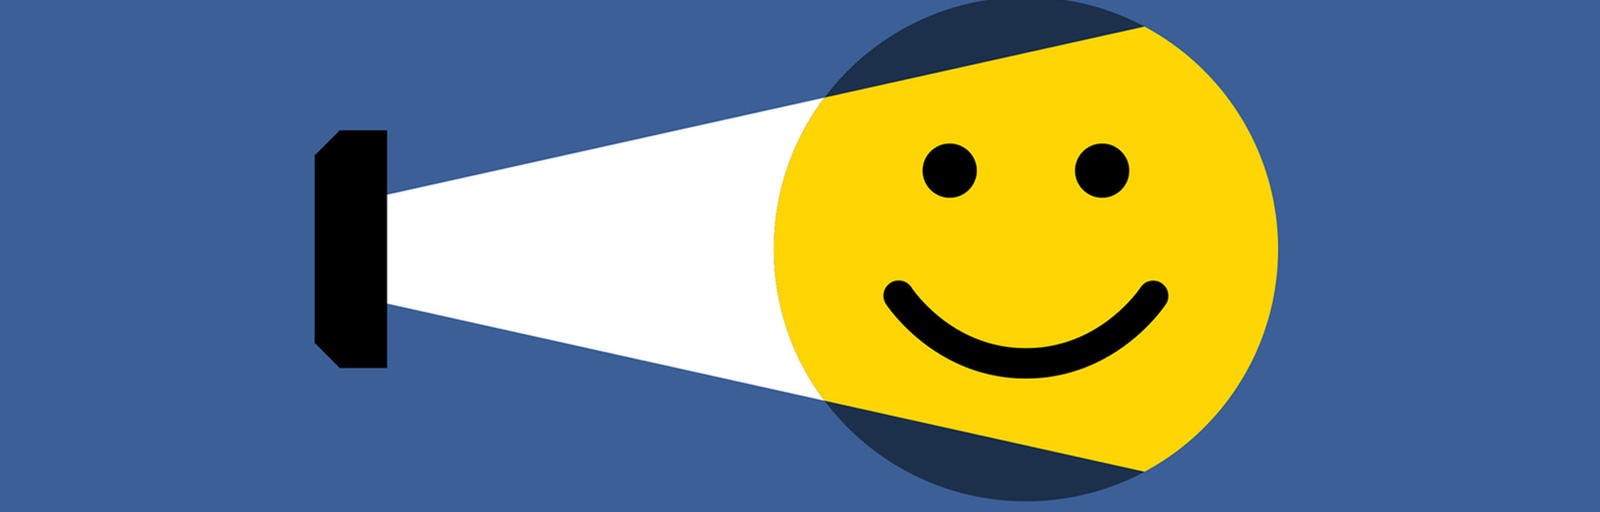 An illustration of a light shining on a smiley face